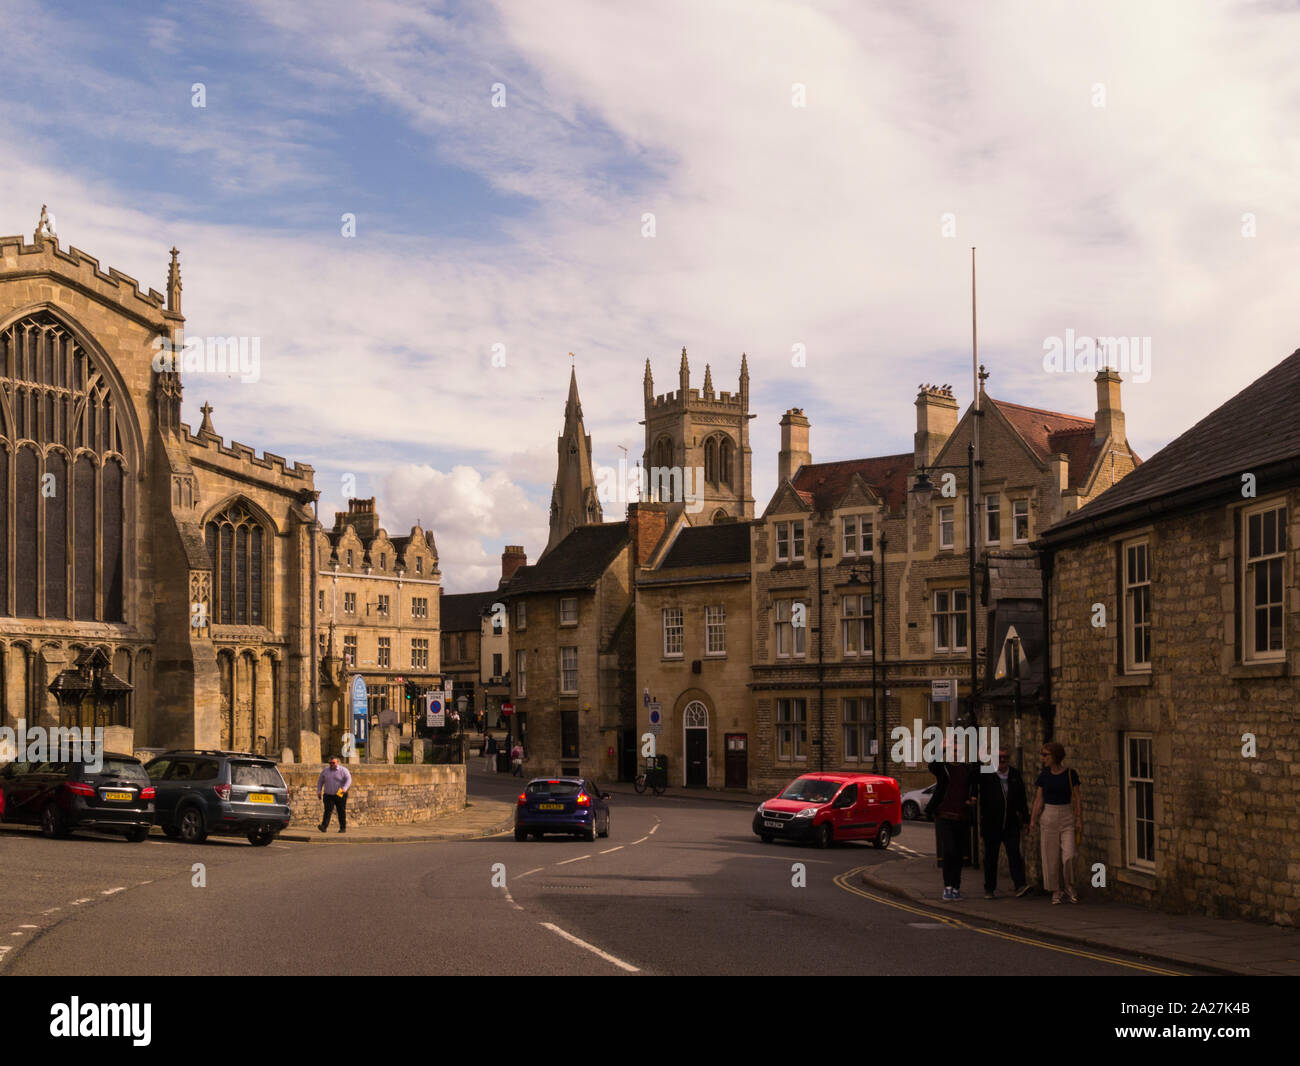 View across Red Lion Square showing three parish churches Stamford Lincolnshire Eastern England UK on a lovely September day a popular film location Stock Photo